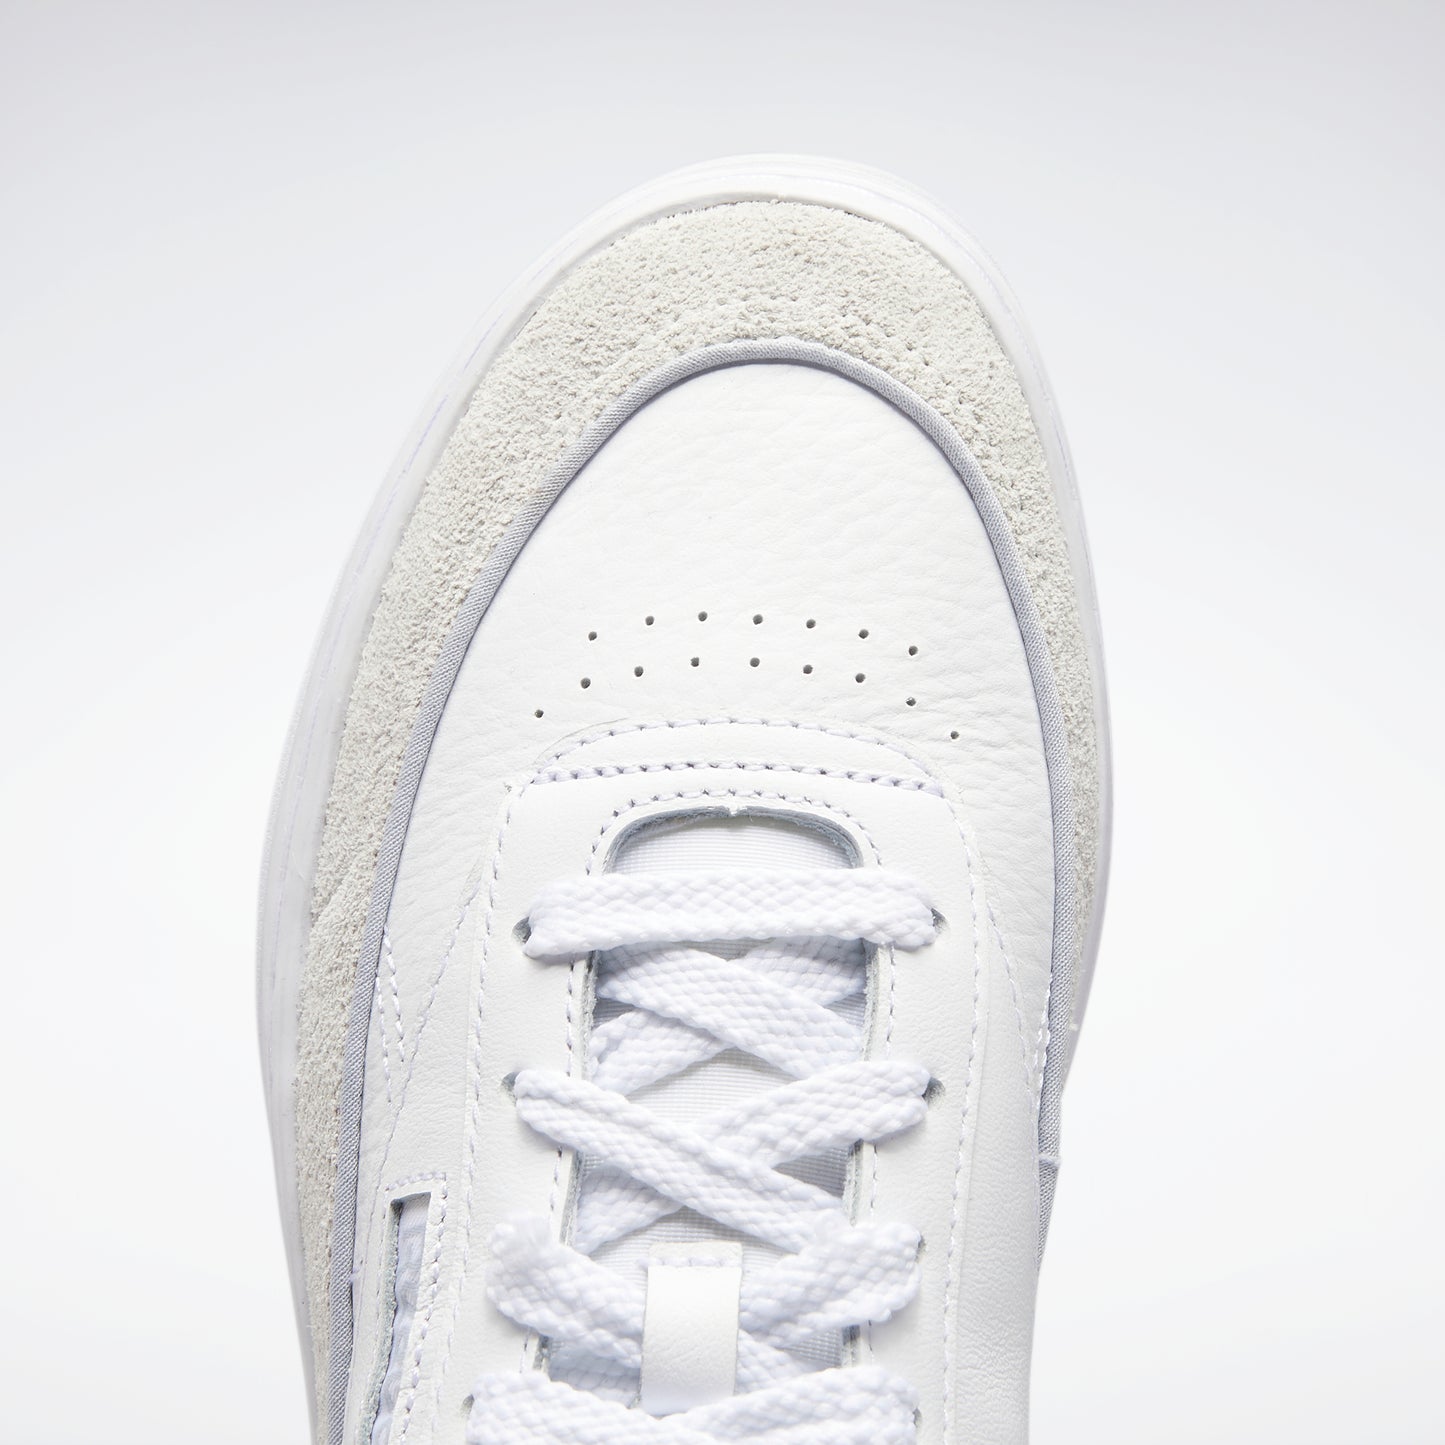 Club C Geo Mid Shoes White/Cold Grey 1/Cold Grey 2